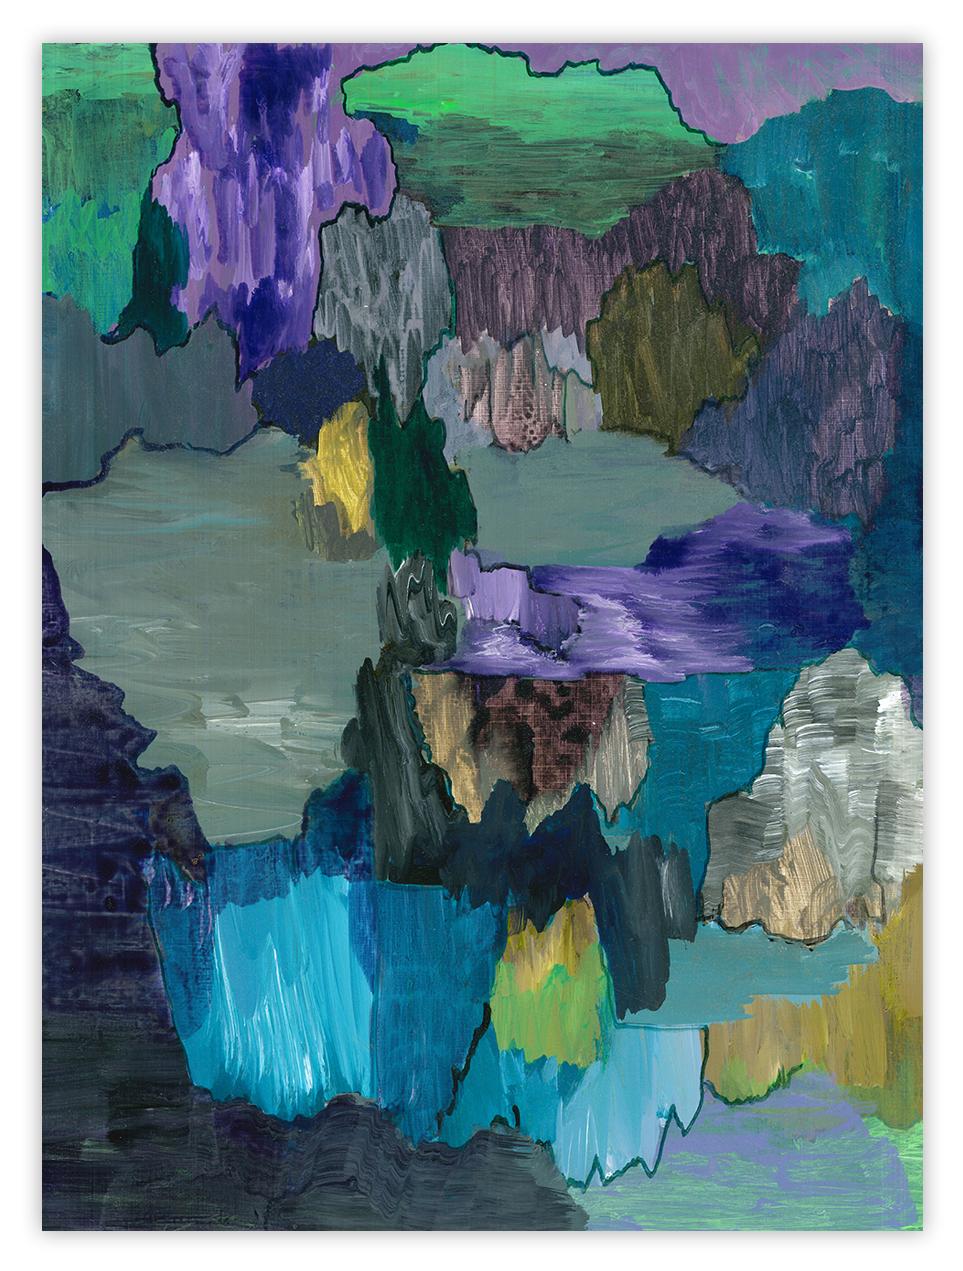 P13.2024 (Abstract Painting)
Acrylic on Hahnemuhle paper - unframed

Antony Densham, an abstract artist based in Aotearoa, New Zealand, is renowned for his distinctive approach to capturing the ephemeral qualities of the landscape. His artistic